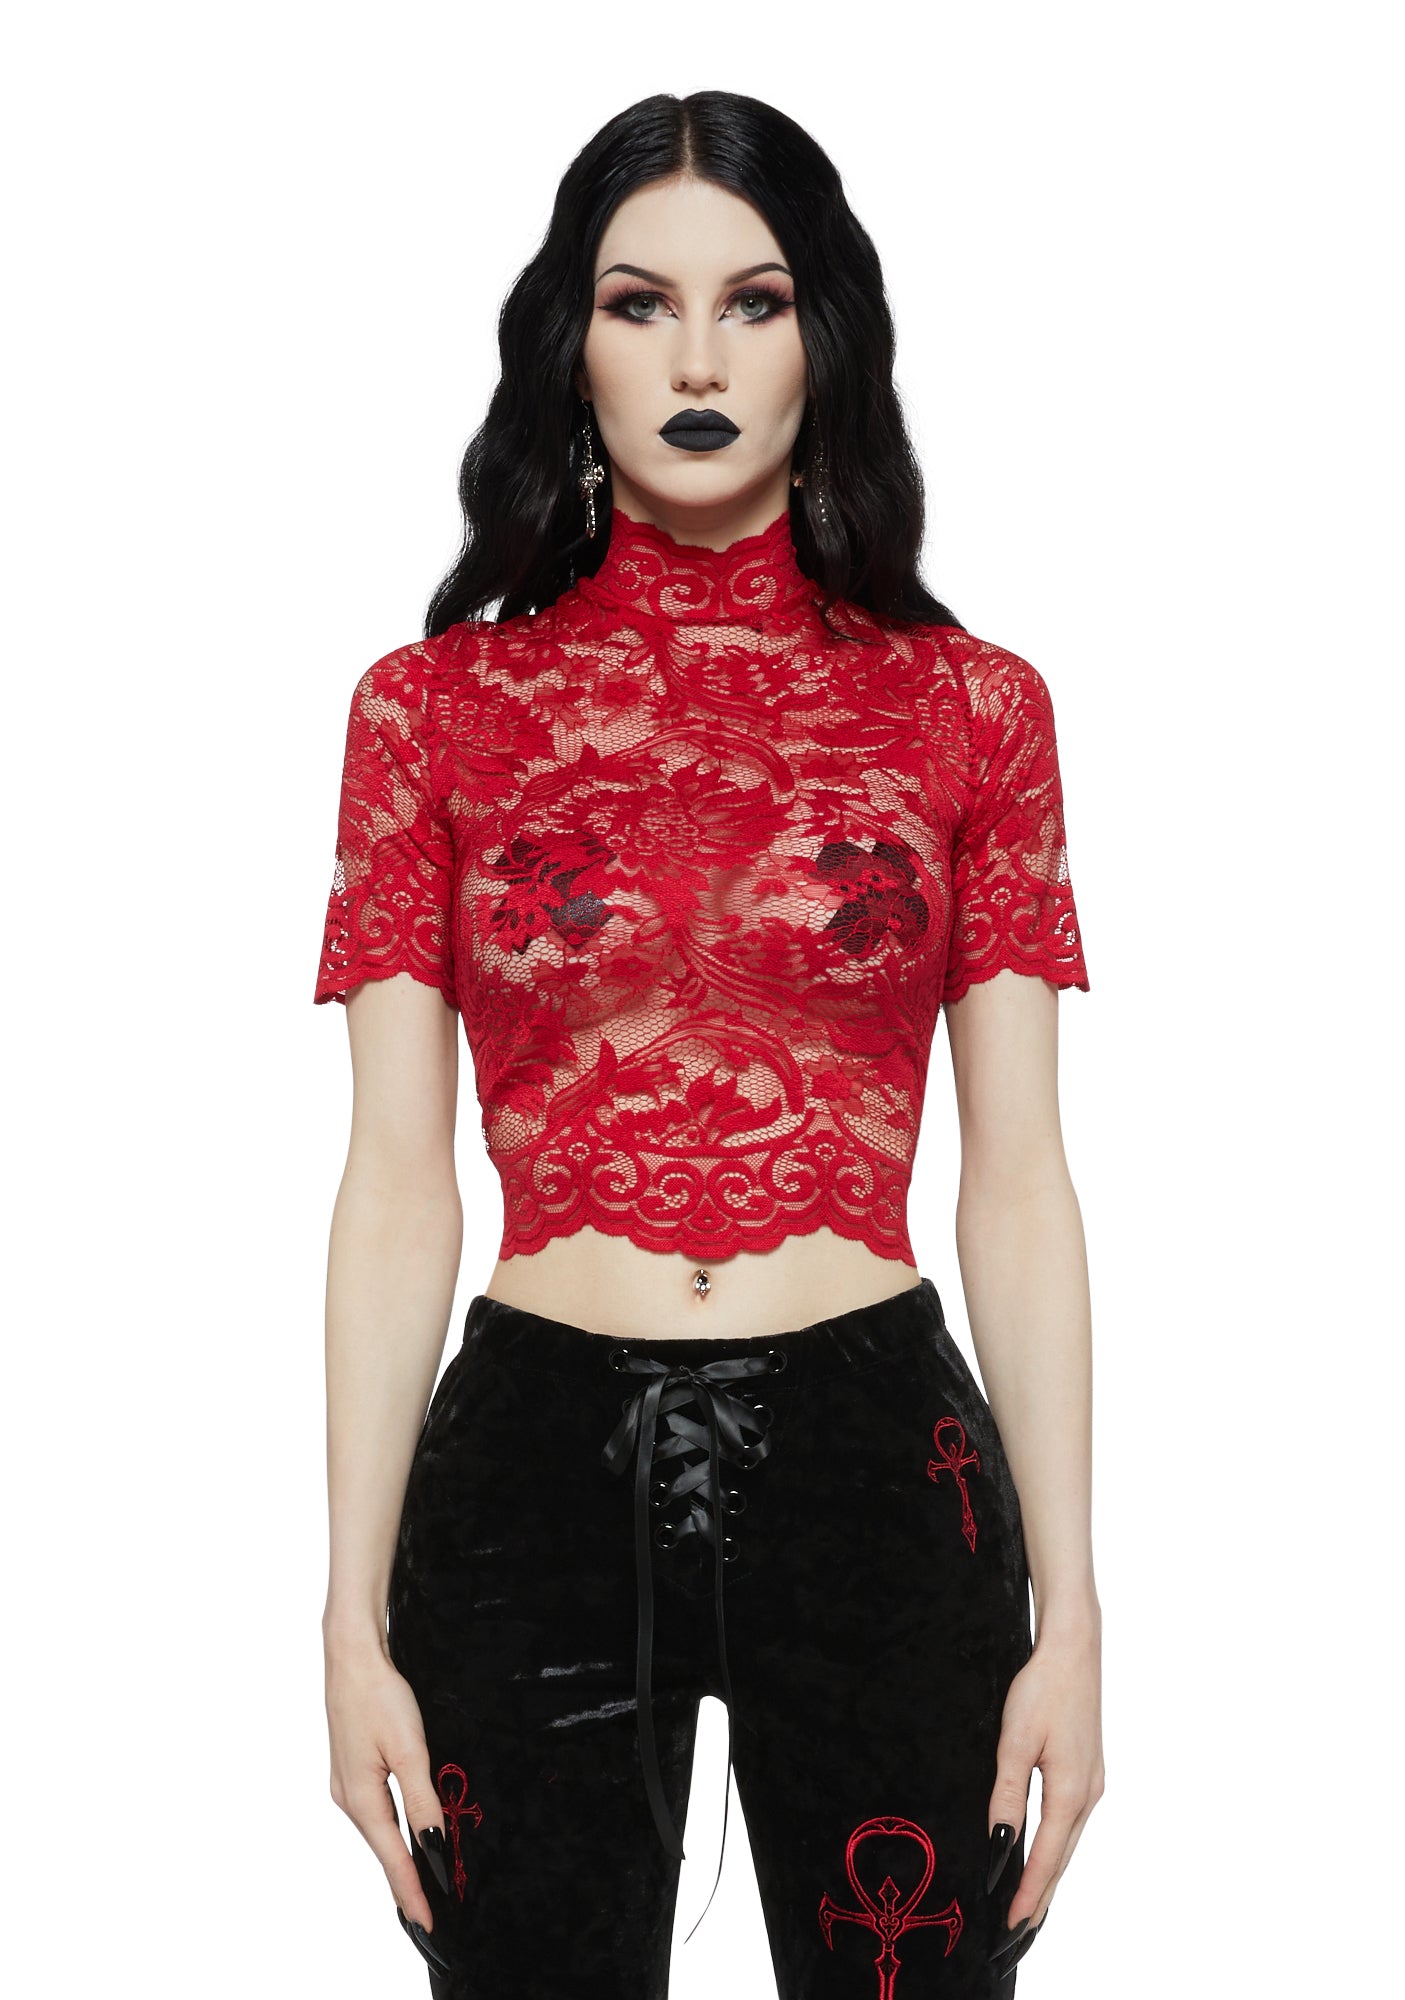 Widow Sheer Lace Top With Lace-Ups - Red